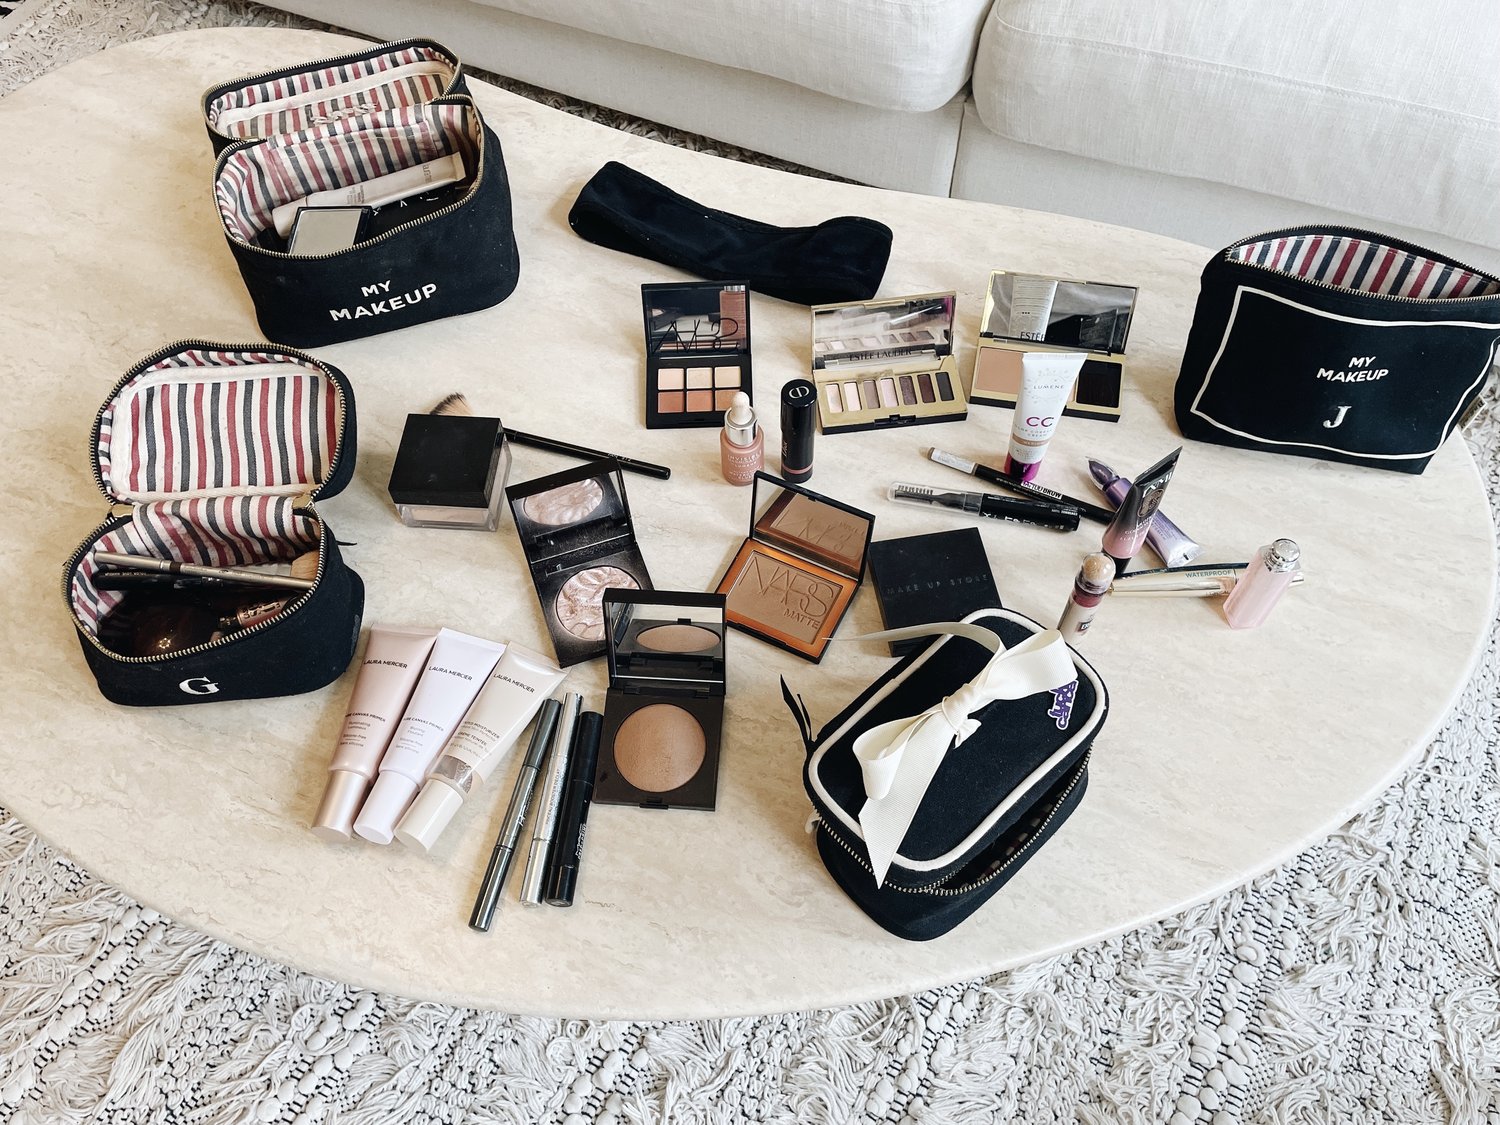 Travel Light with Bag-all’s Beauty Storage